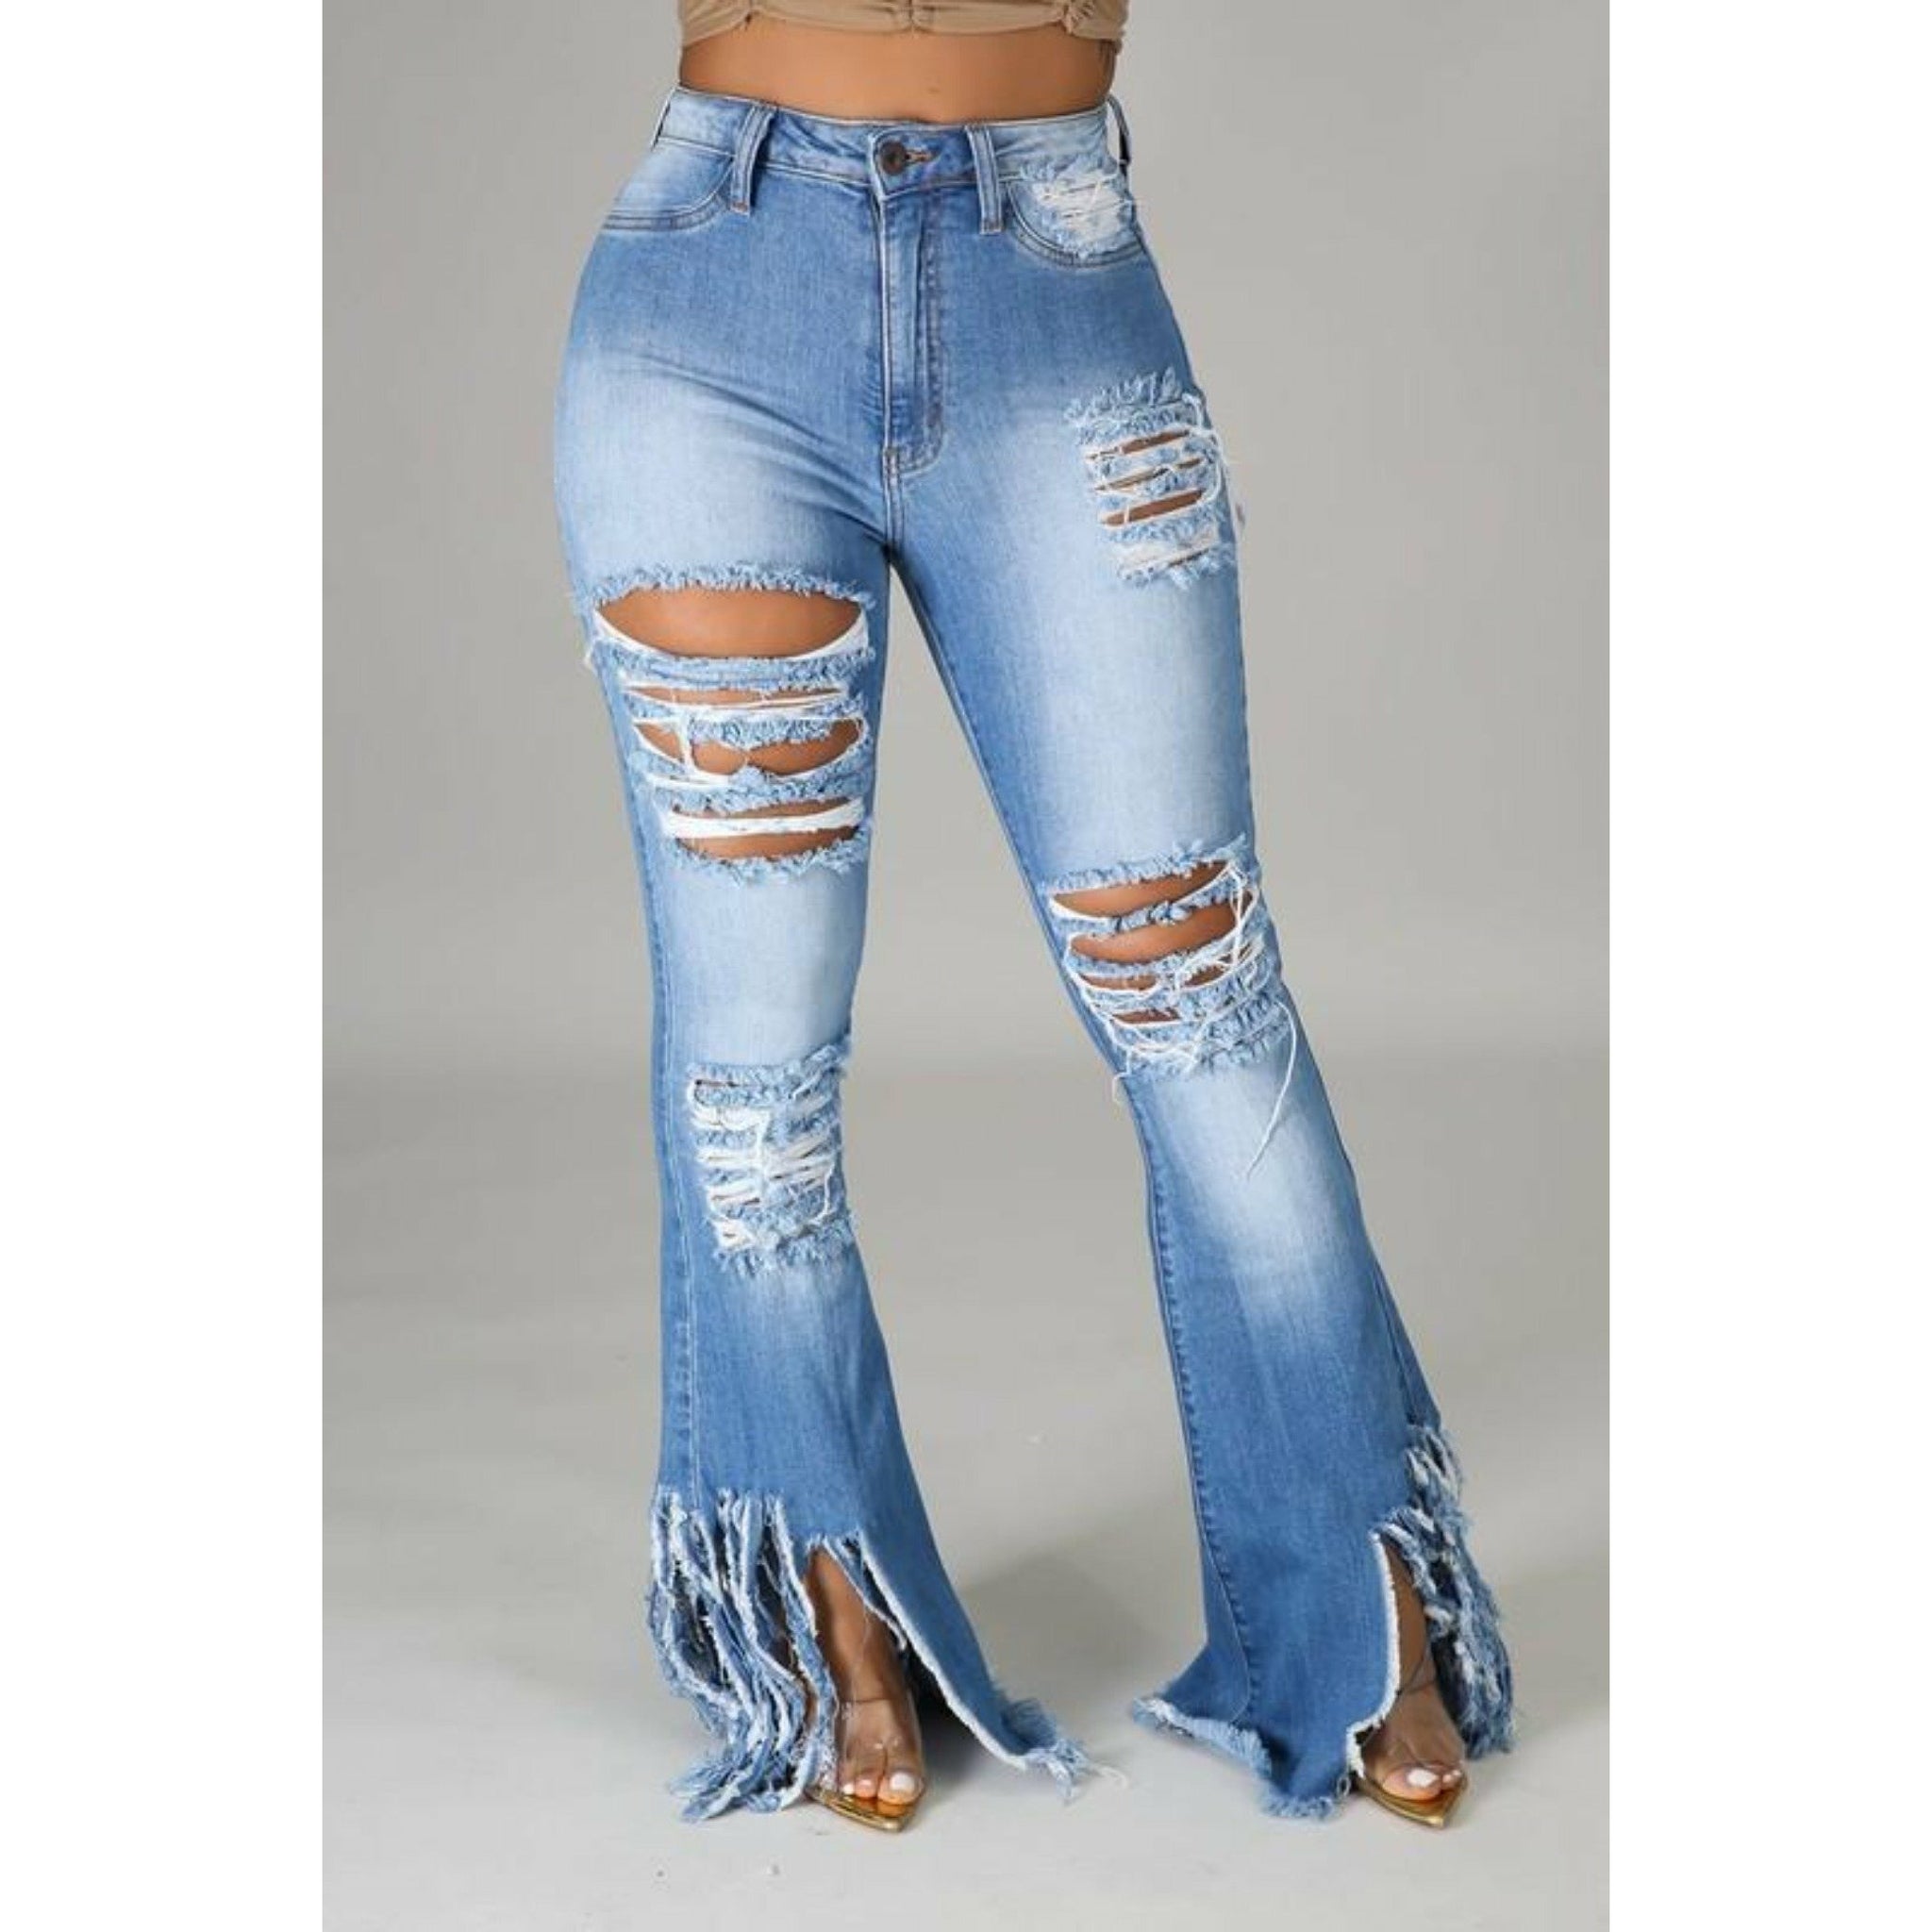 Bad Gal Distressed High Rise Jeans